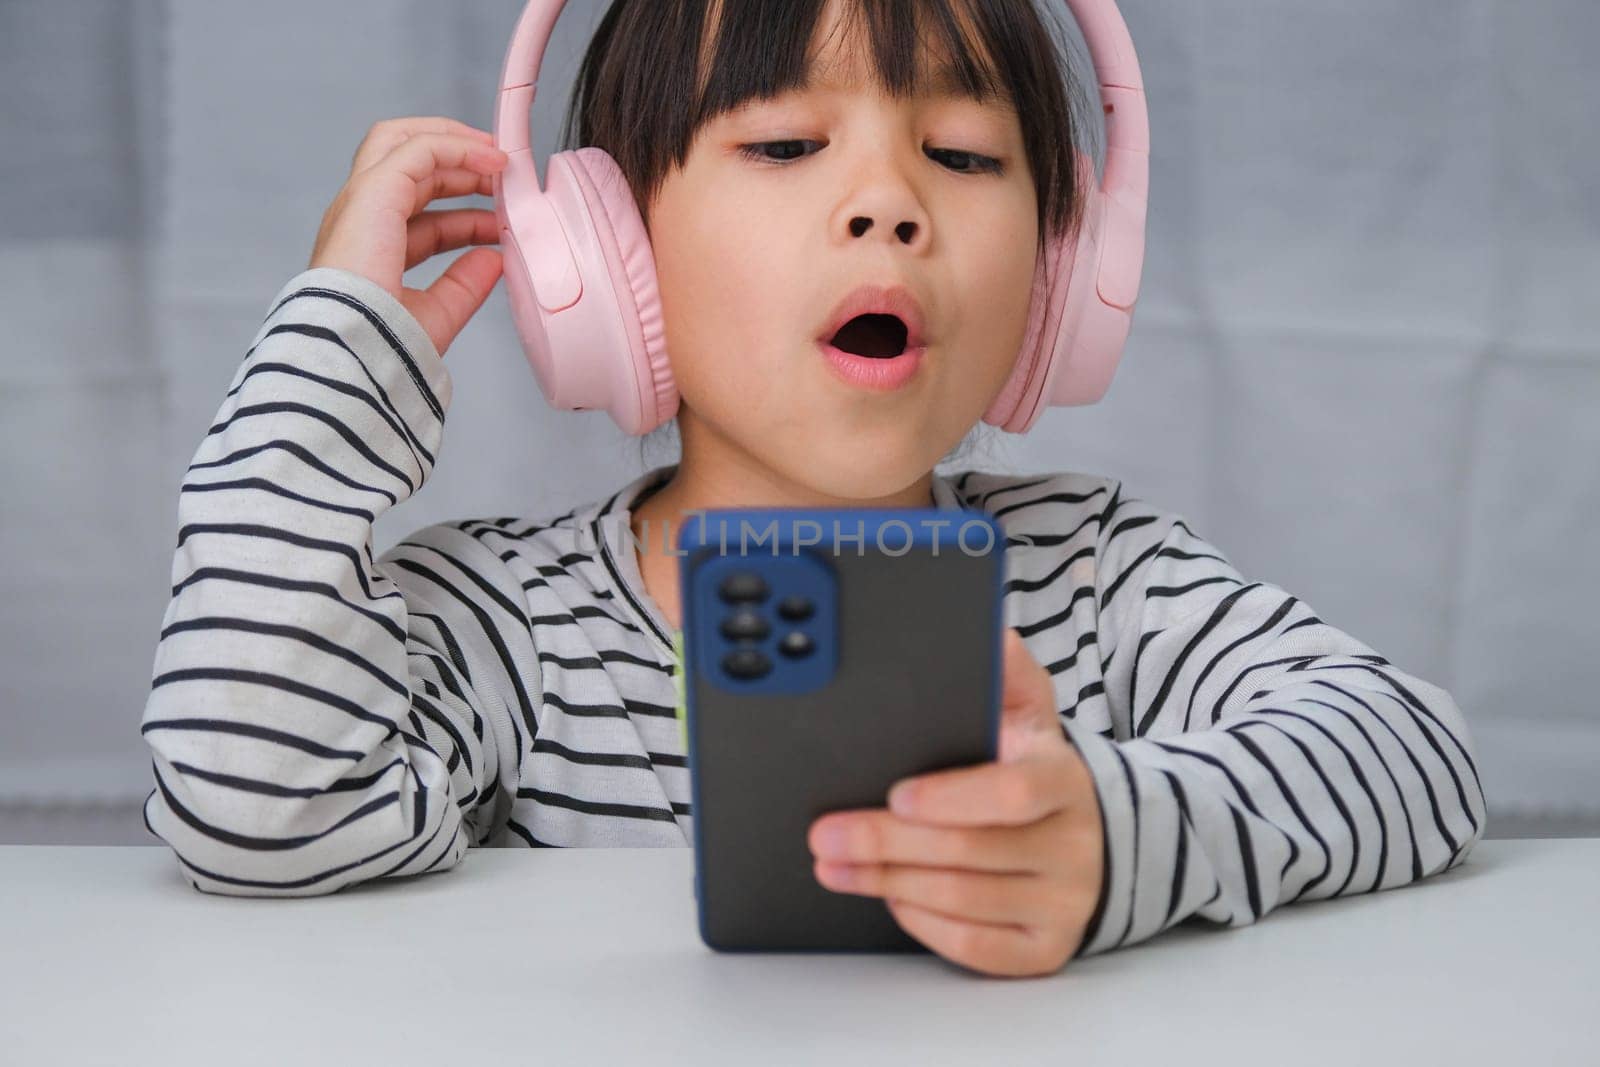 Cute elementary school girl wearing headphones holding a smartphone. Happy Asian girl studying online on smartphone or homeschooling, listening to music or playing games.